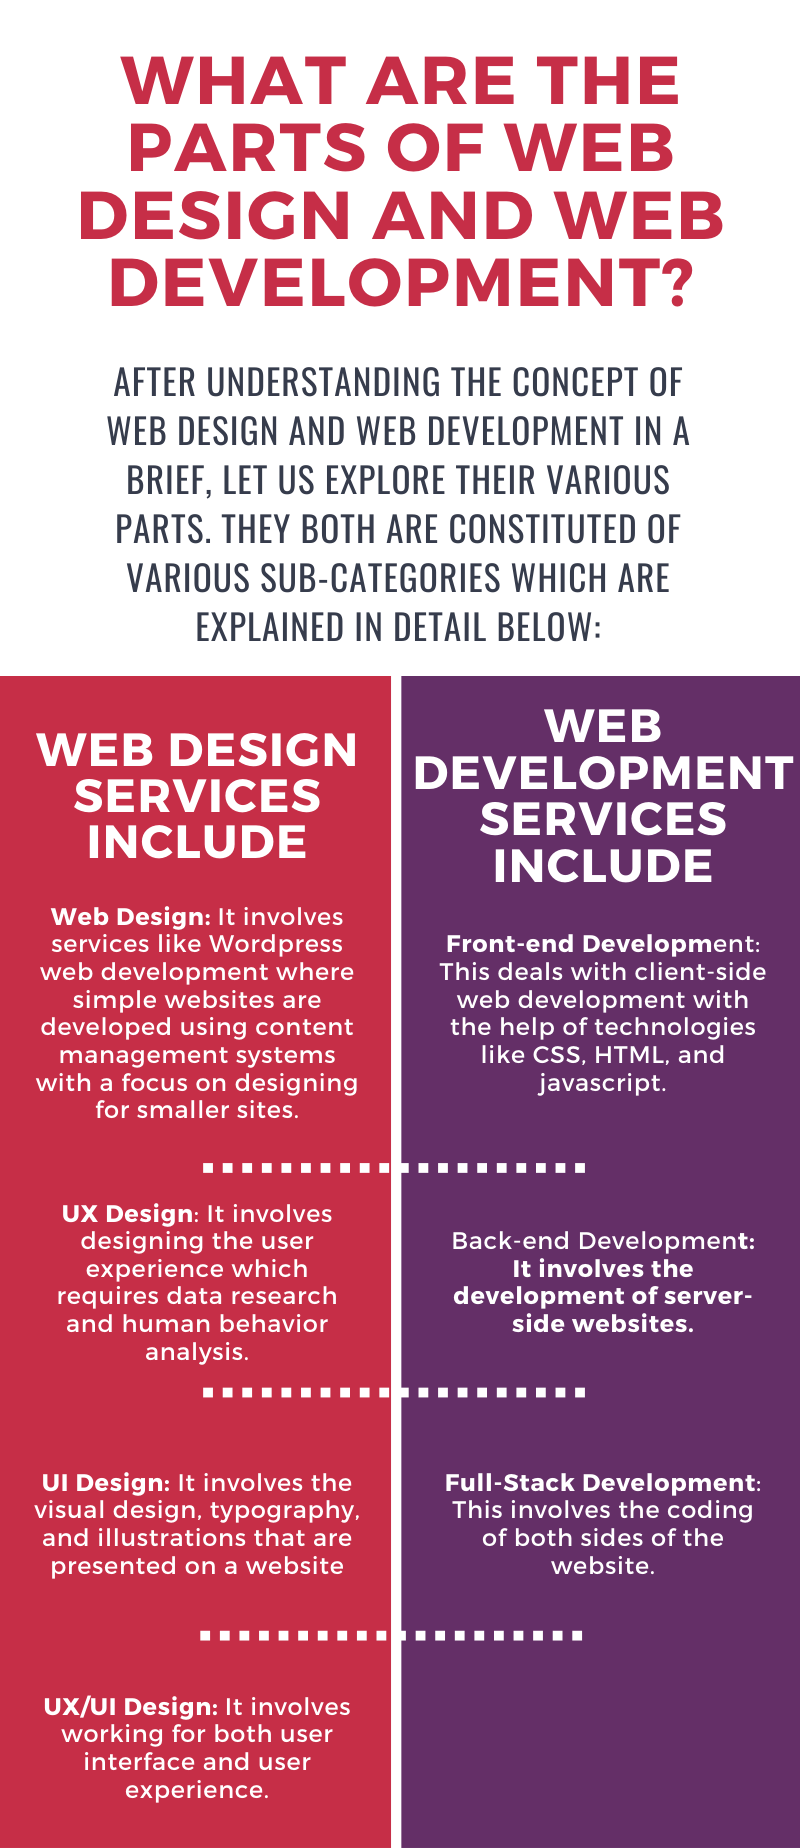 What are the various web development services